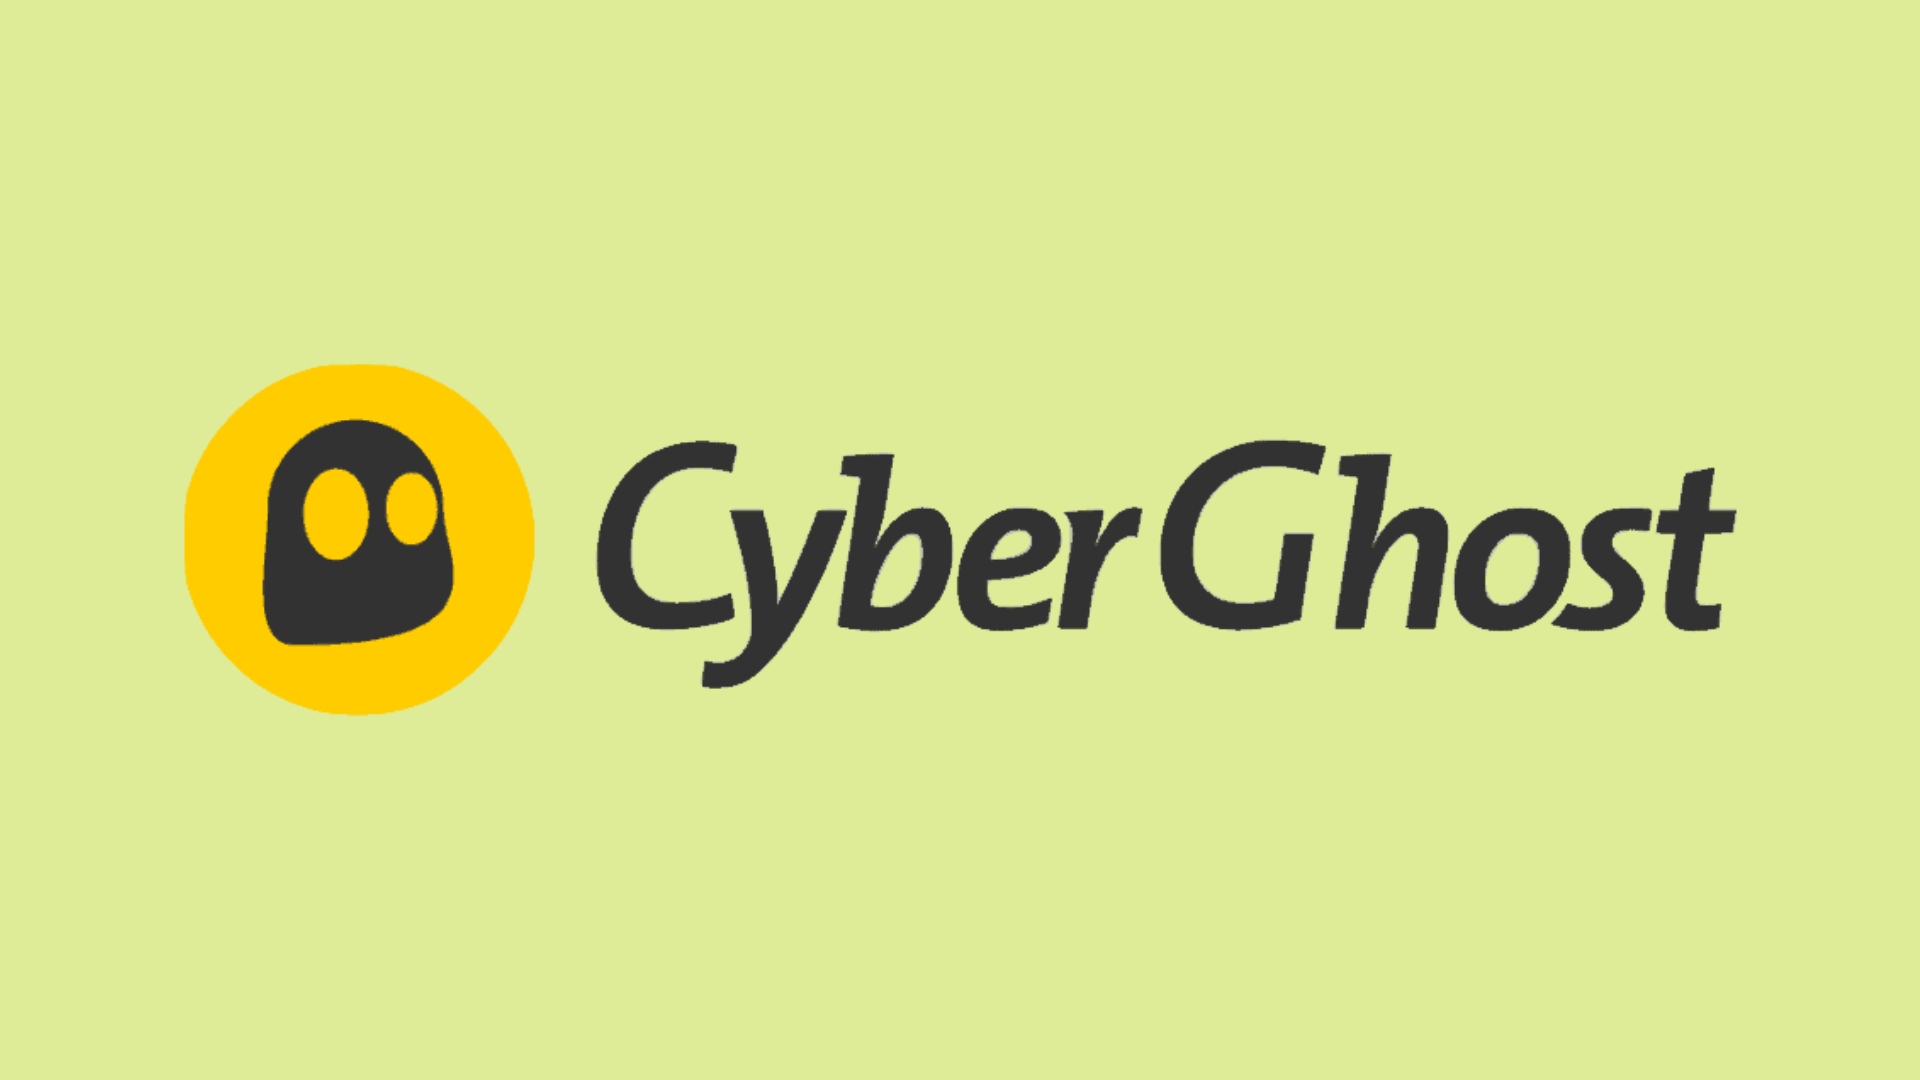 Best Dota 2: CyberGhost. Image shows the company logo.